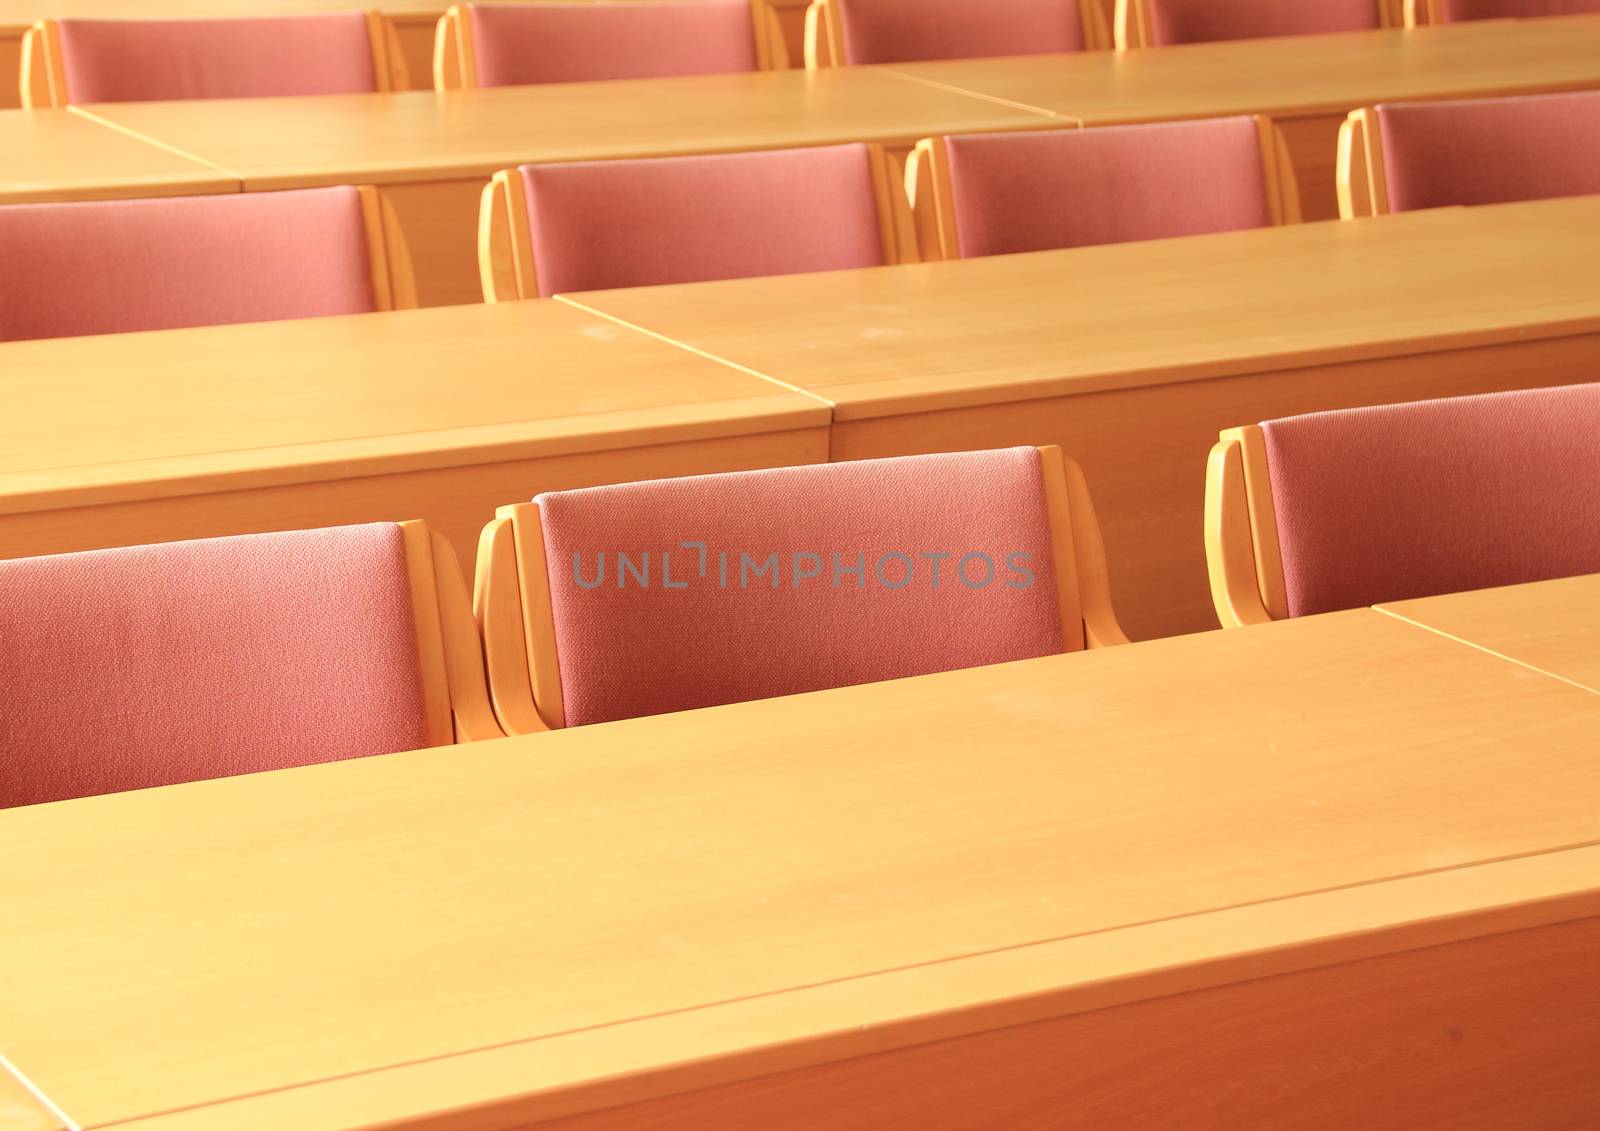 Empty conference room with wooden chairs facing front